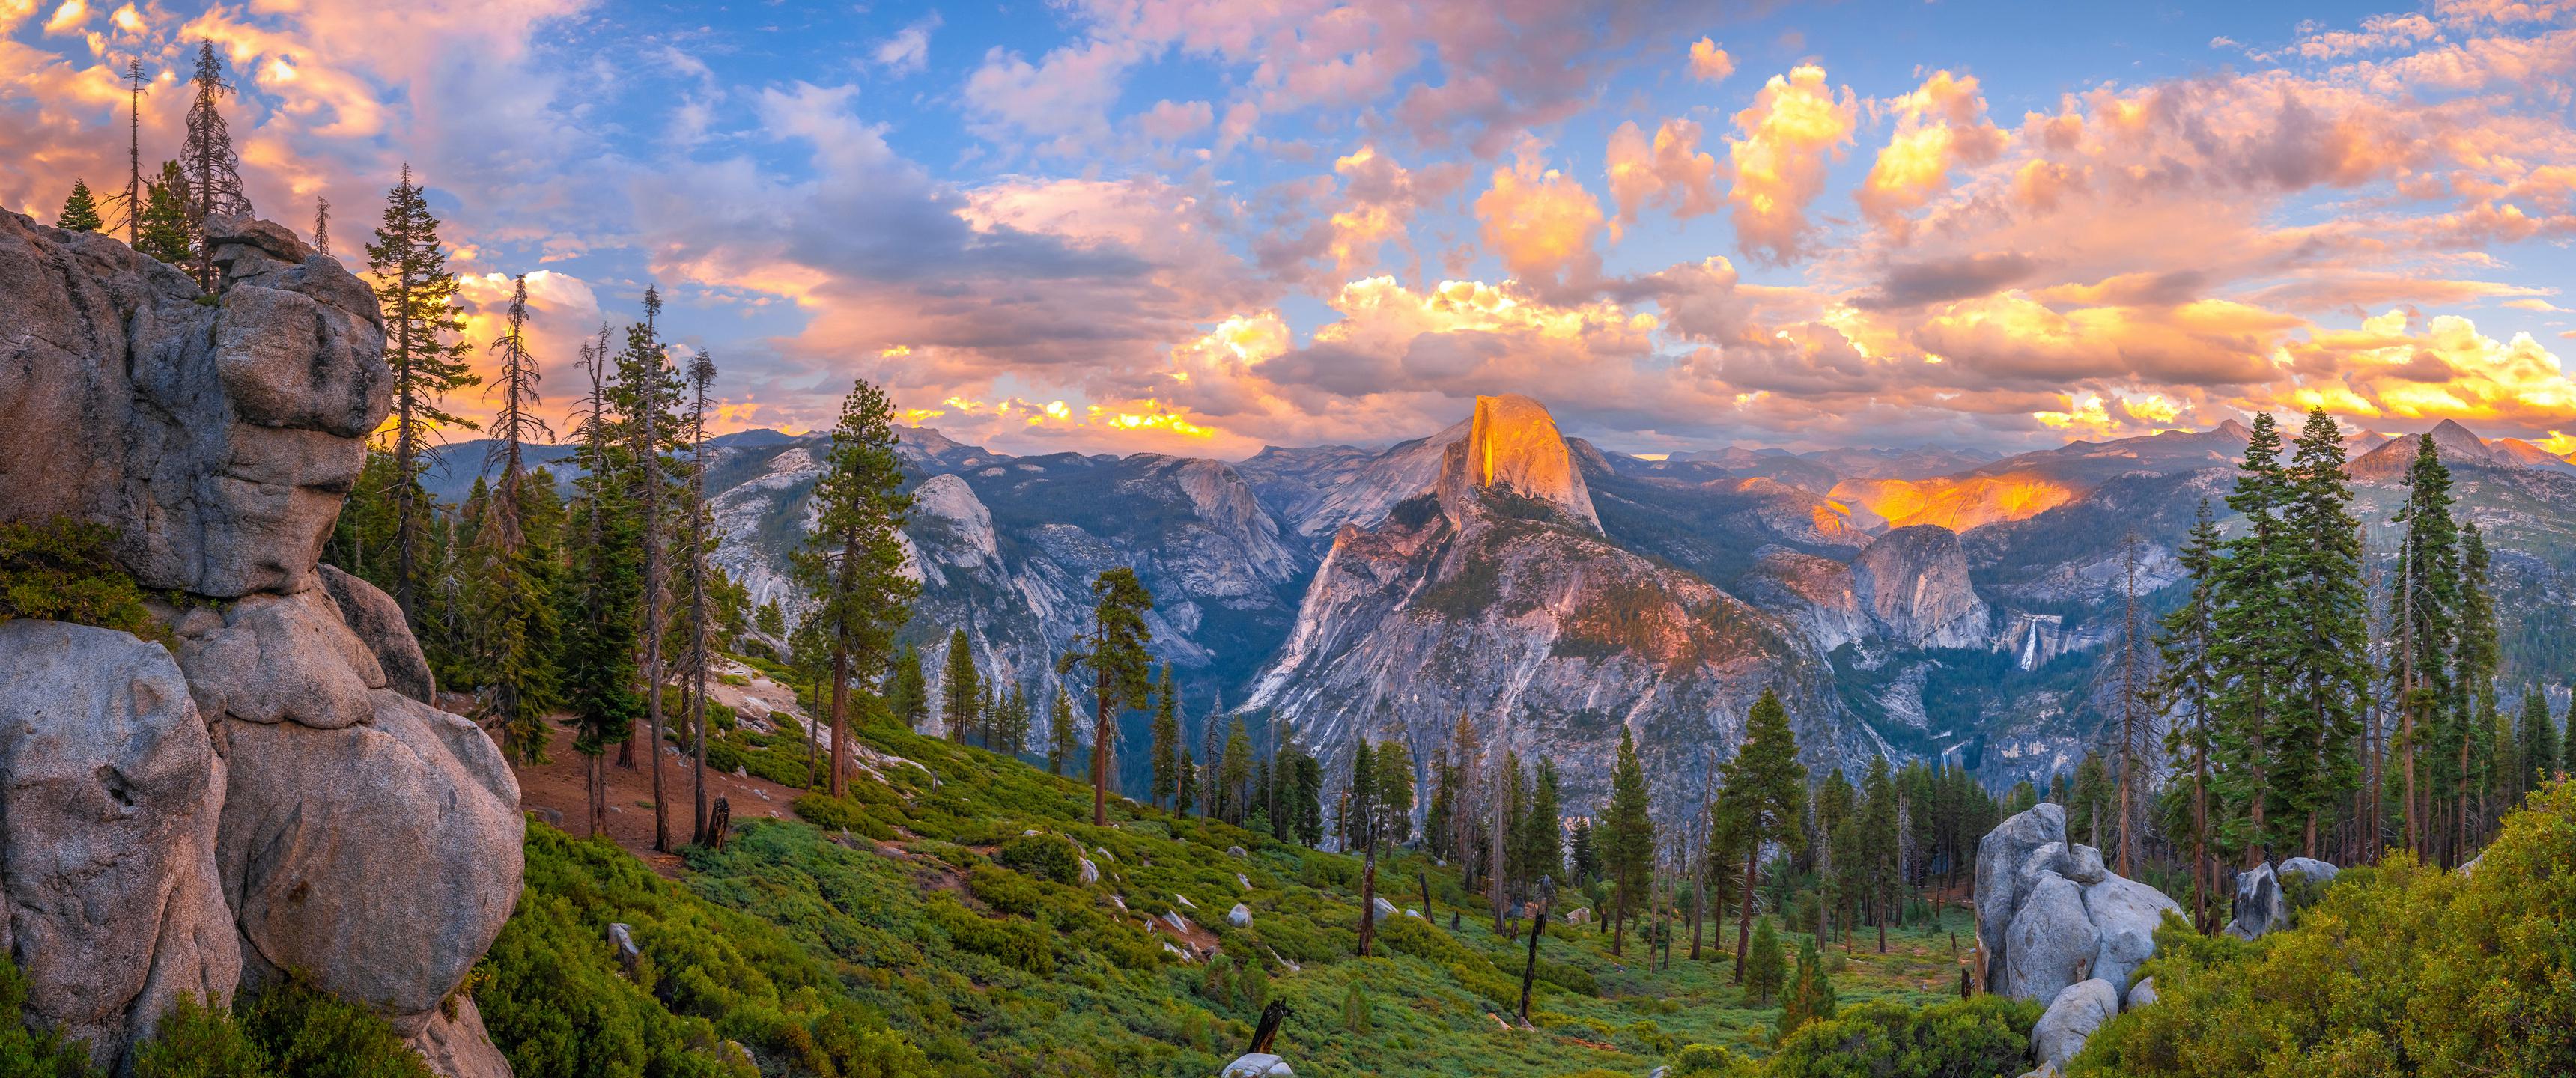 Yosemite National Park Half Dome Nature Forest National Park Sunset Glow 3440x1440